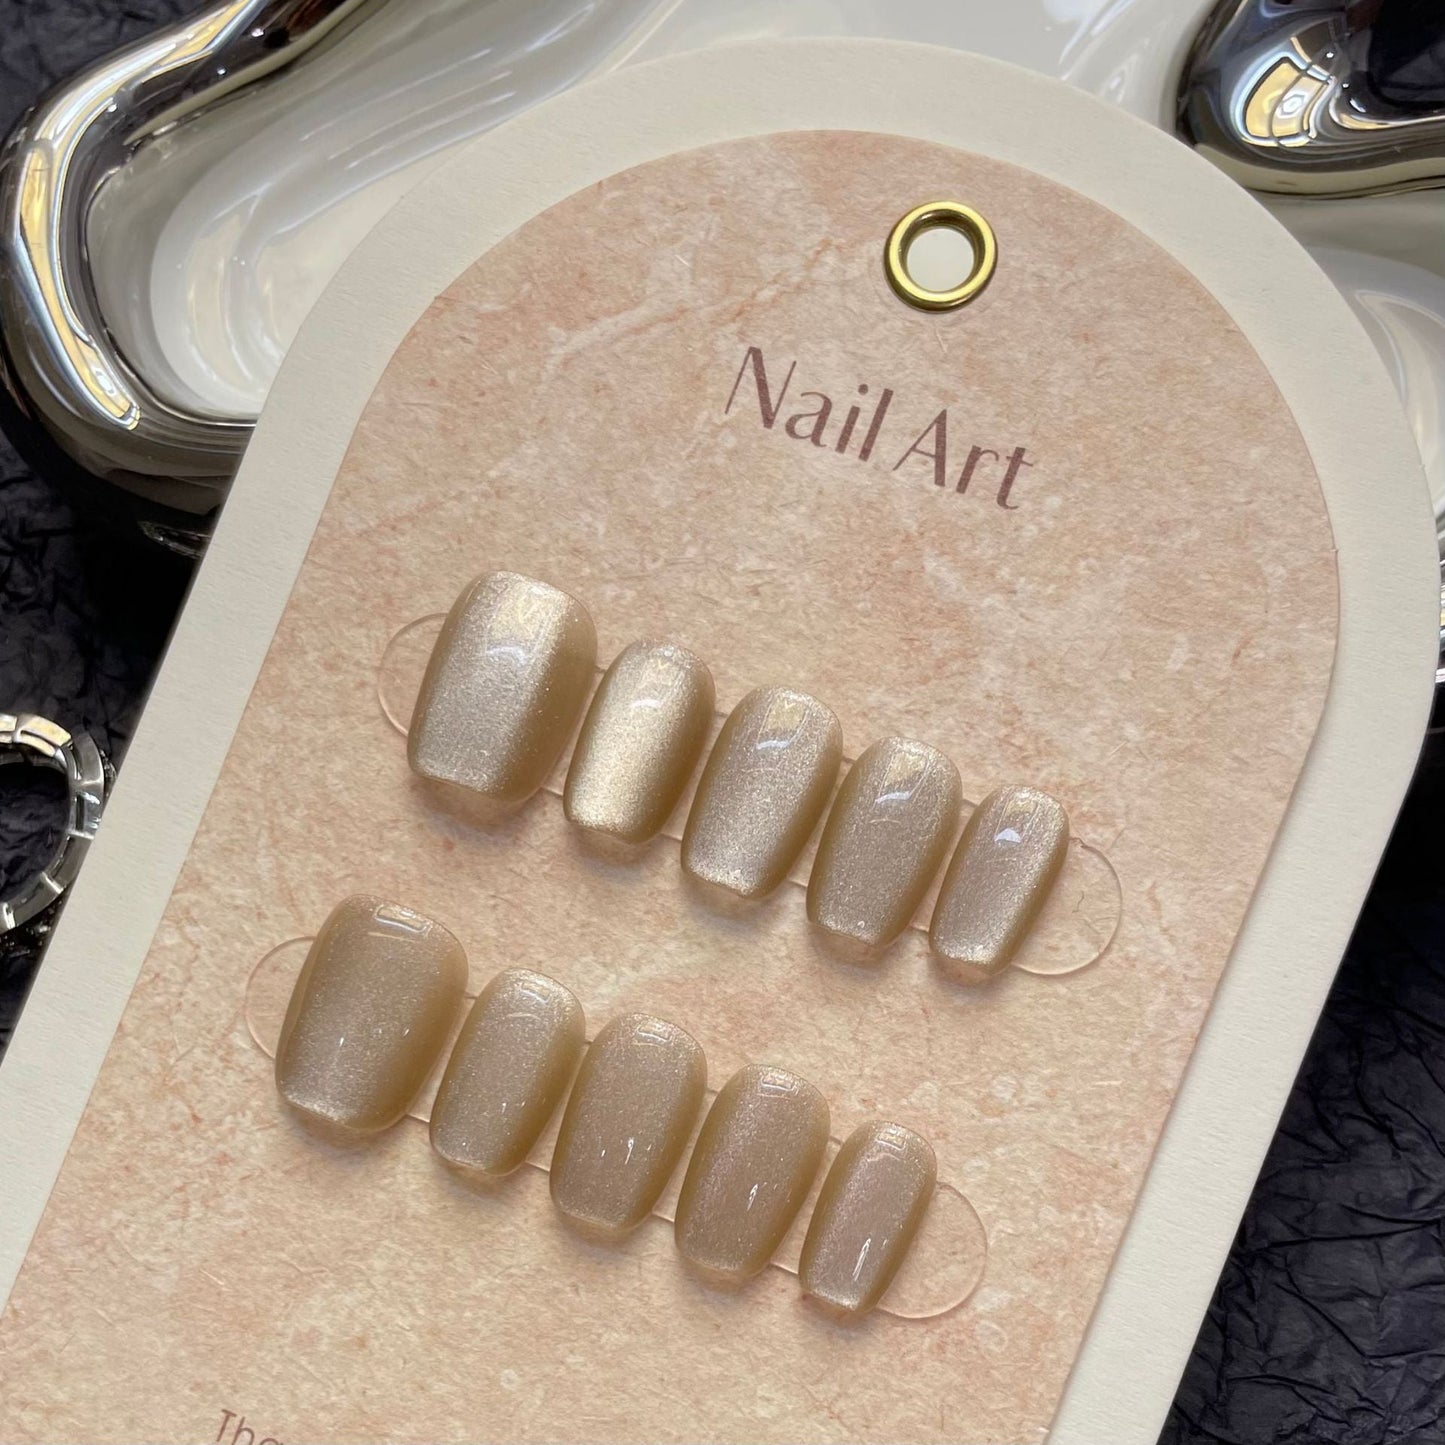 1238 Cateye Effect style press on nails 100% handmade false nails nude color golden